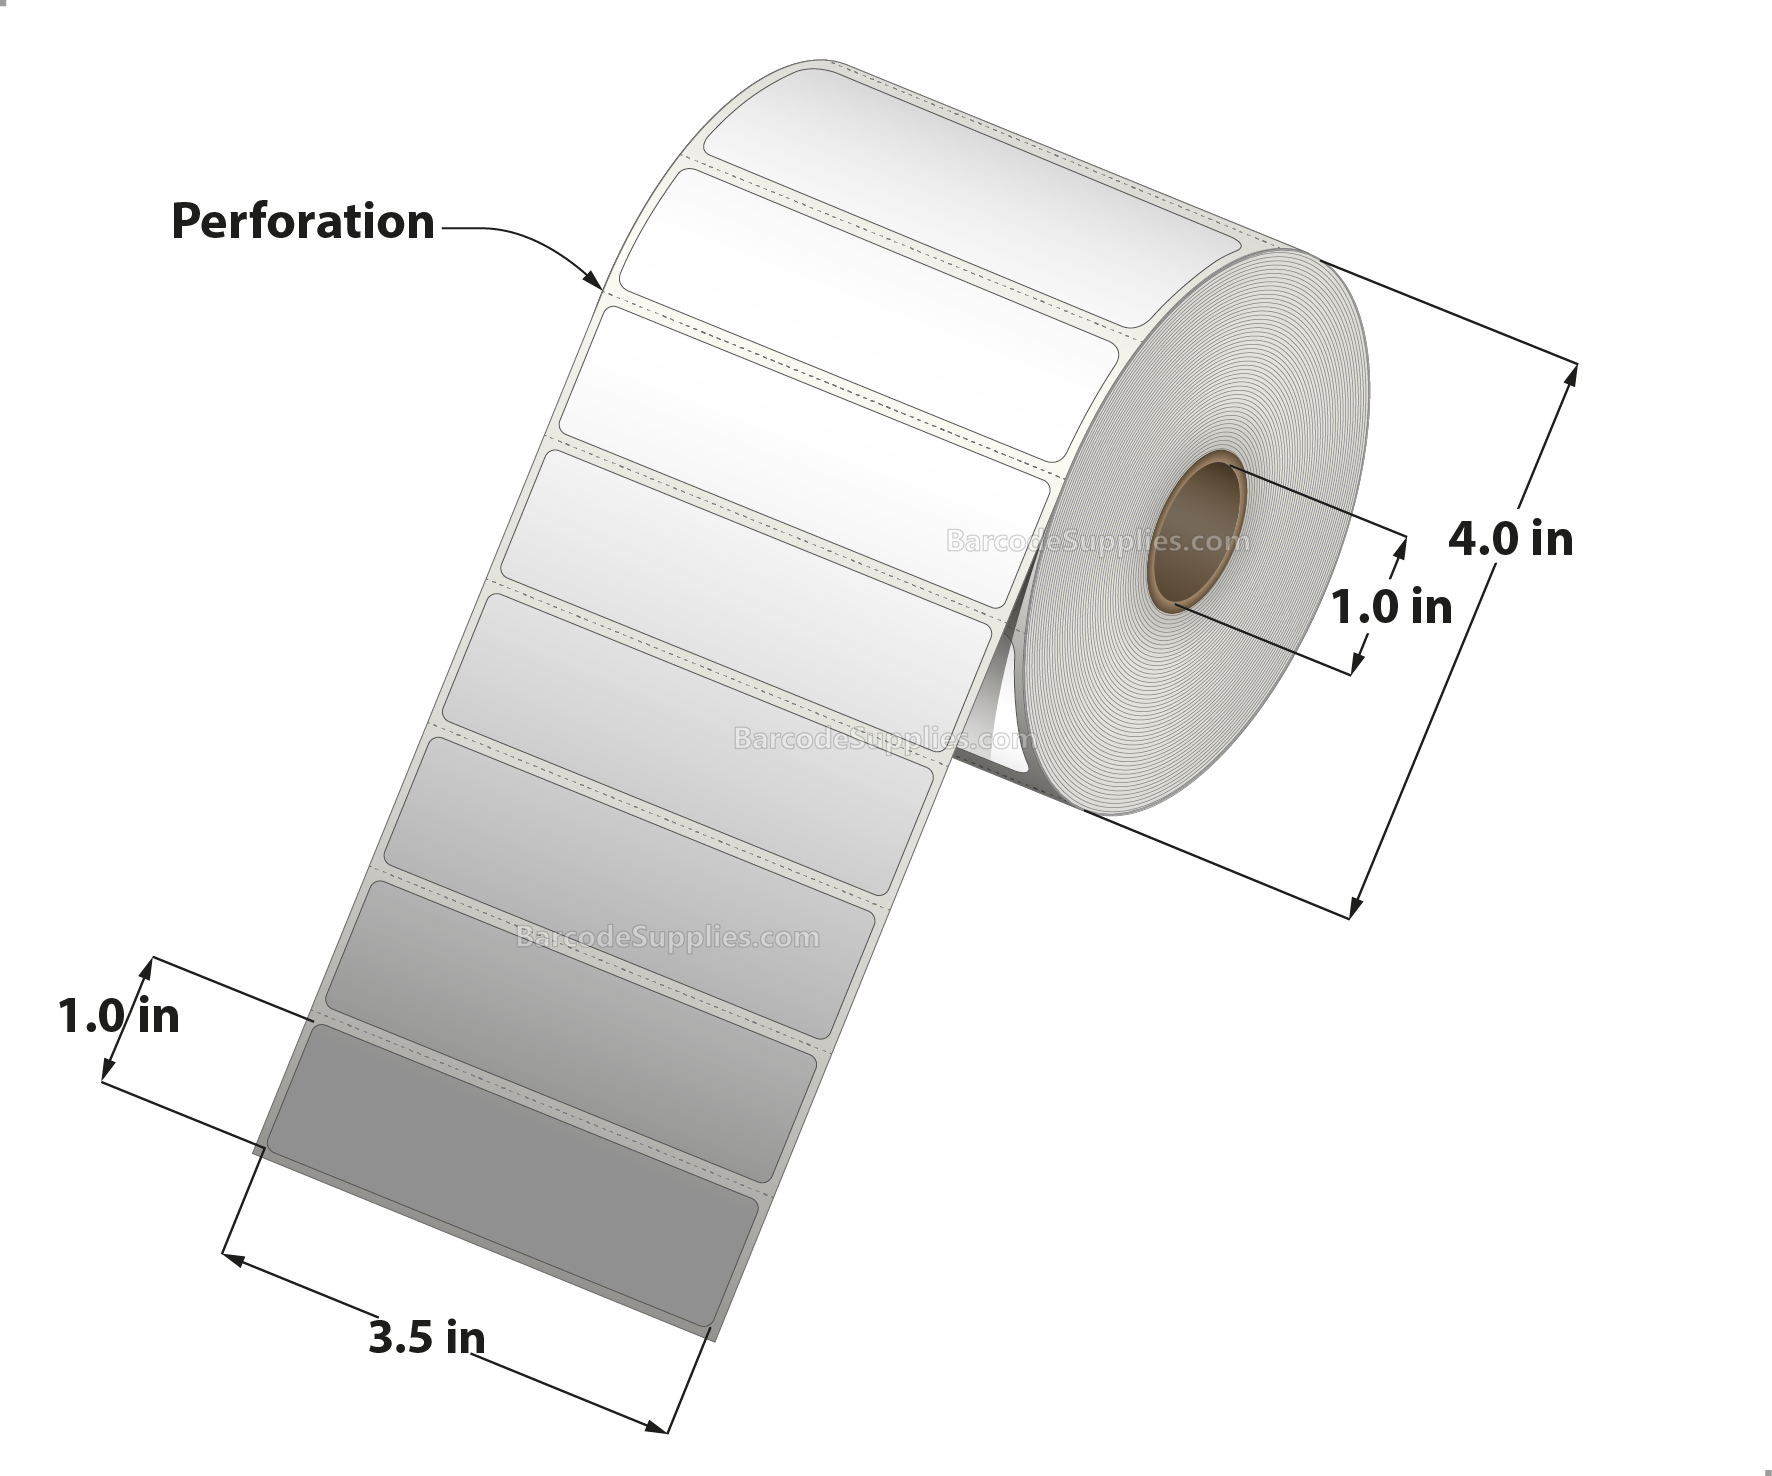 3.5 x 1 Thermal Transfer White Labels With Permanent Adhesive - Perforated - 1375 Labels Per Roll - Carton Of 12 Rolls - 16500 Labels Total - MPN: RT-35-1-1375-1